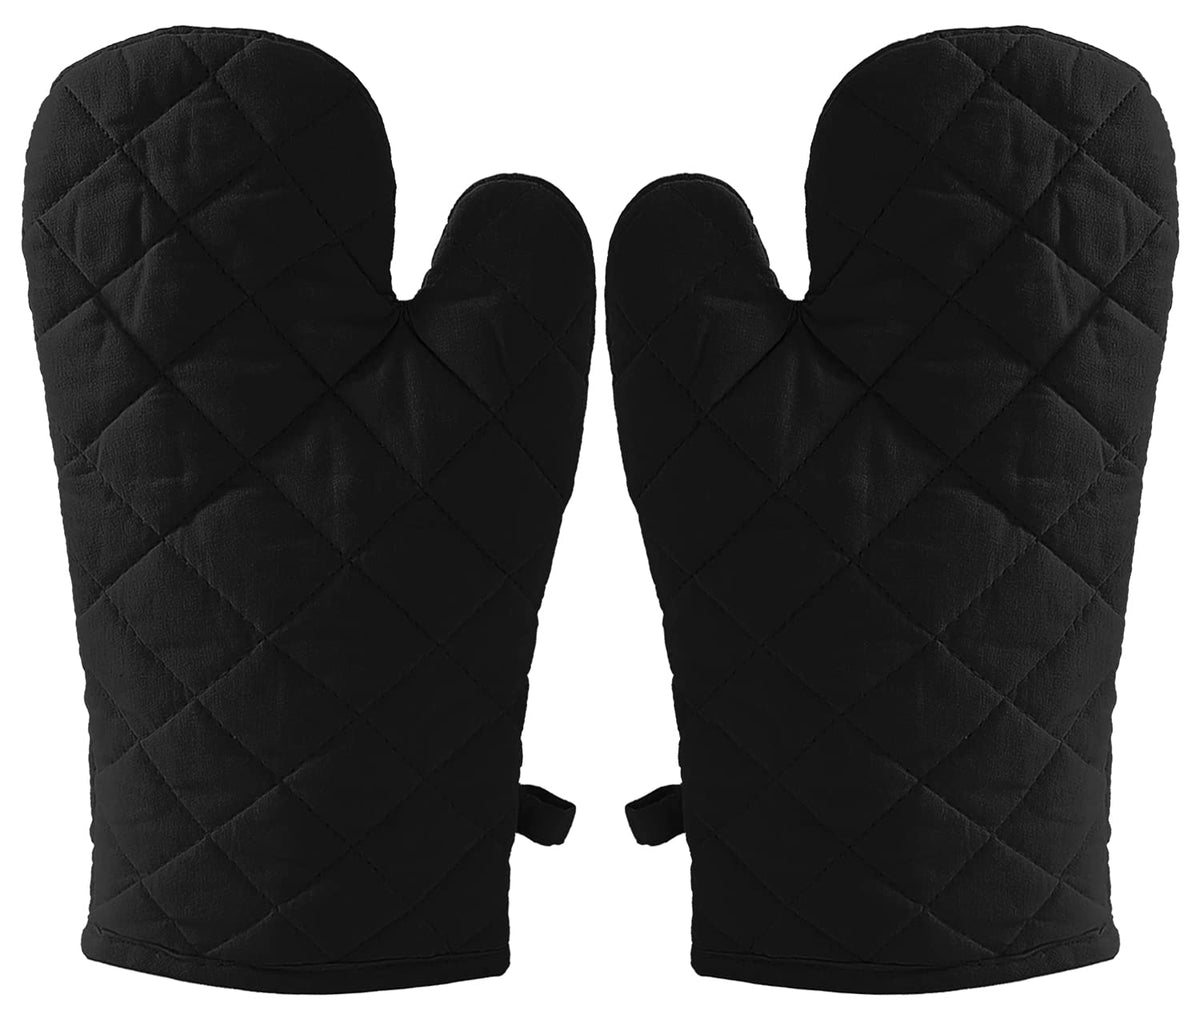 Heart Home 1 Pair Oven Gloves Heat Proof|Cotton Oven Mitts|Baking Gloves For Oven (Black)